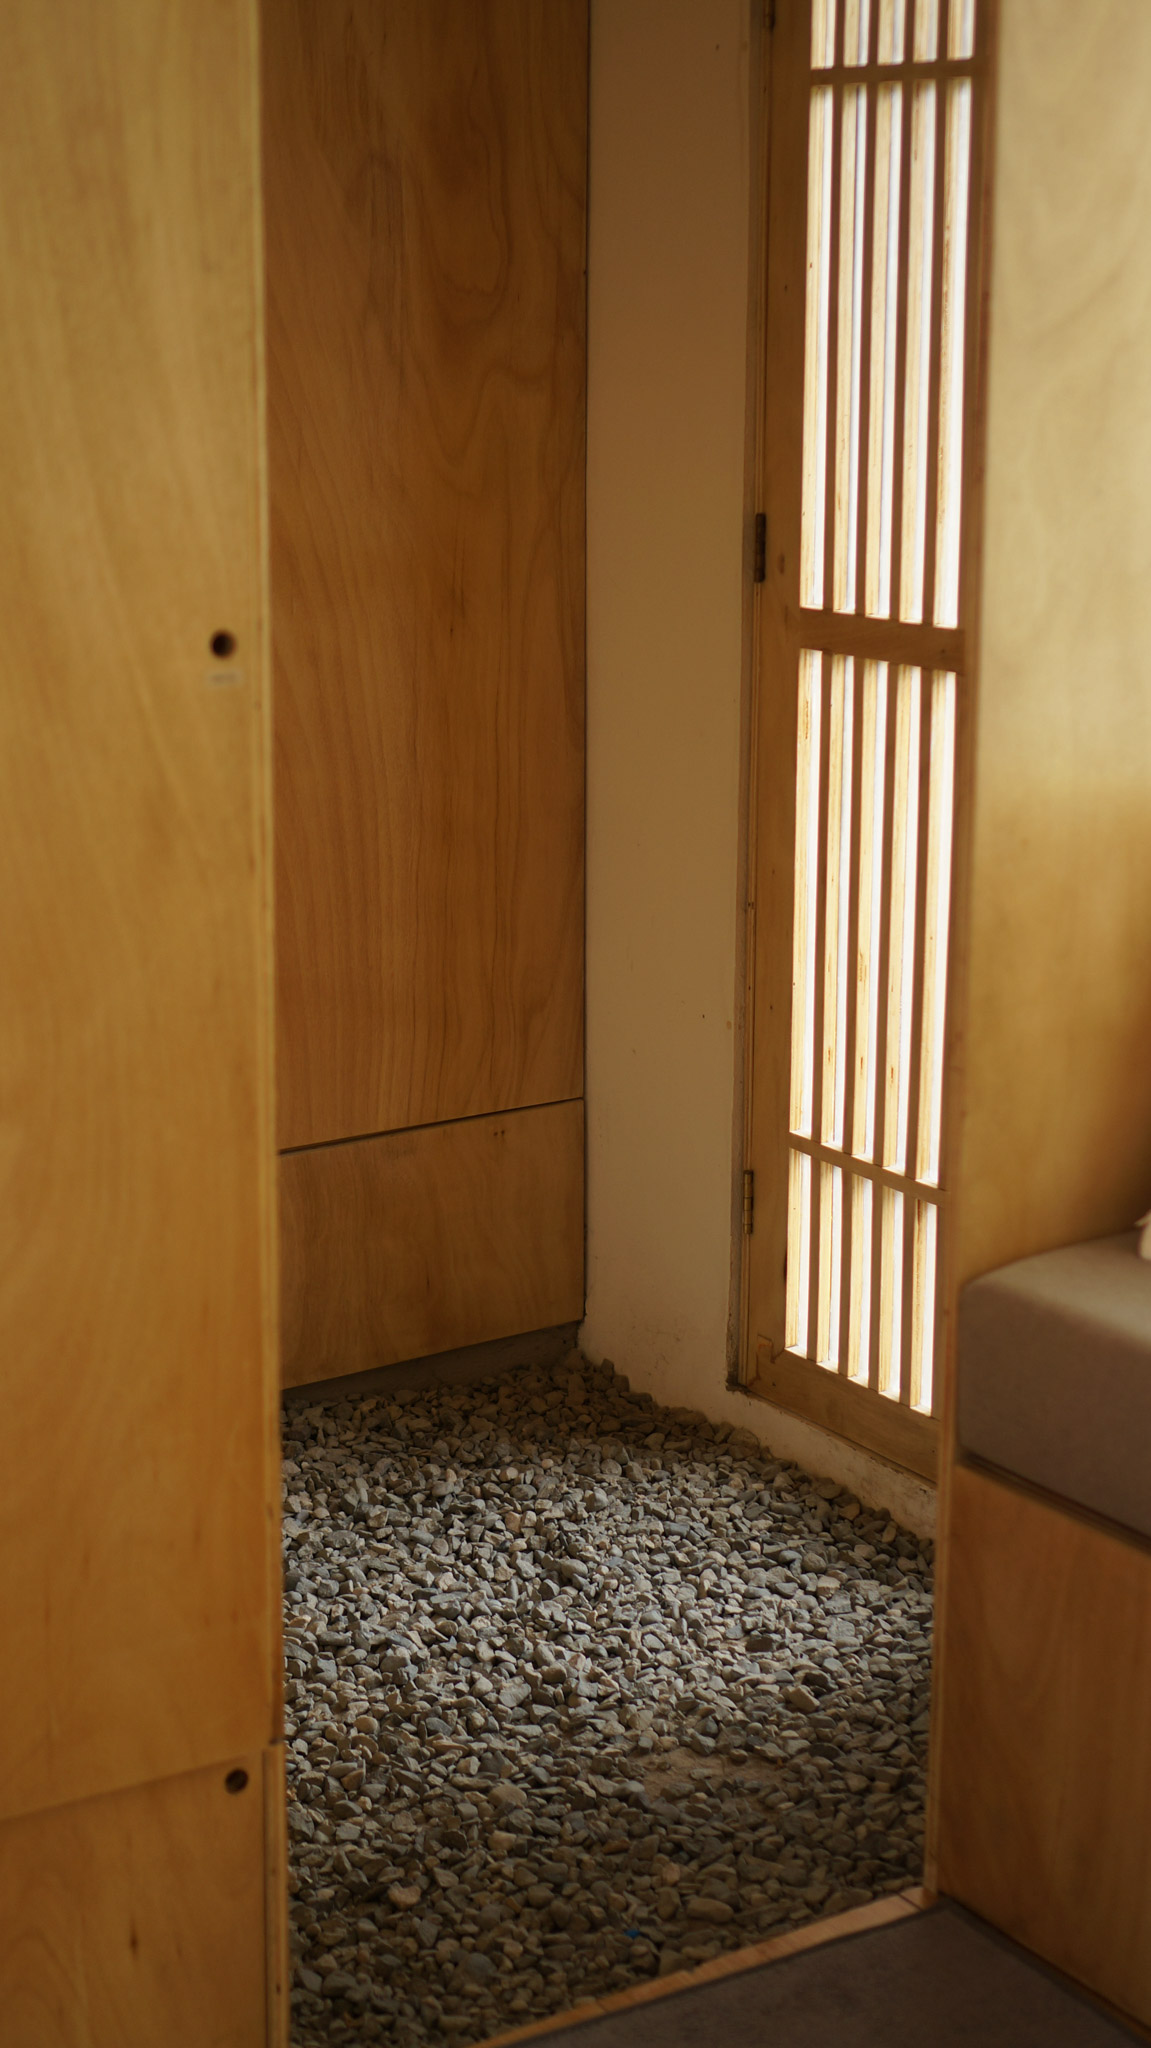 A small house design's little foyer with gravel on the ground and the detail of the front door inspired by Japanese shoji screens.